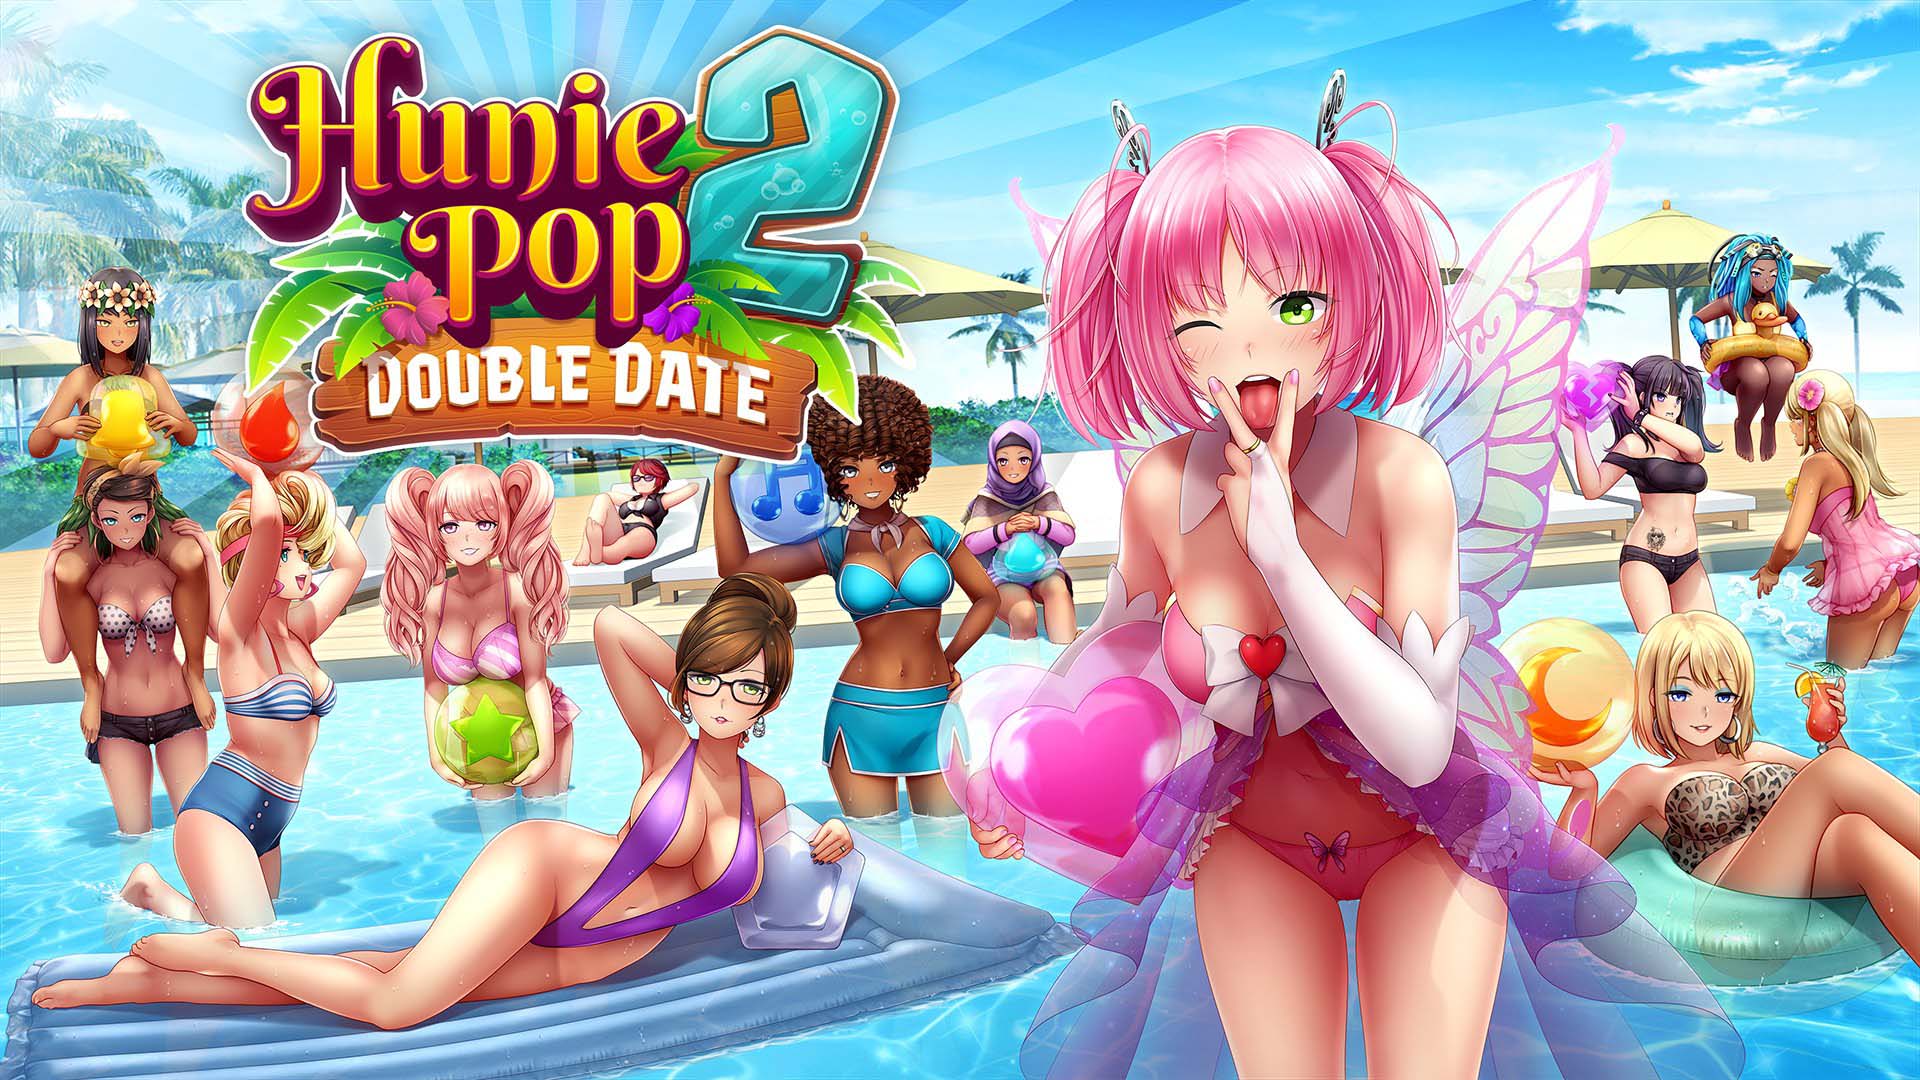 H-Game 573: HuniePop 2 Double Date v1.0.5 